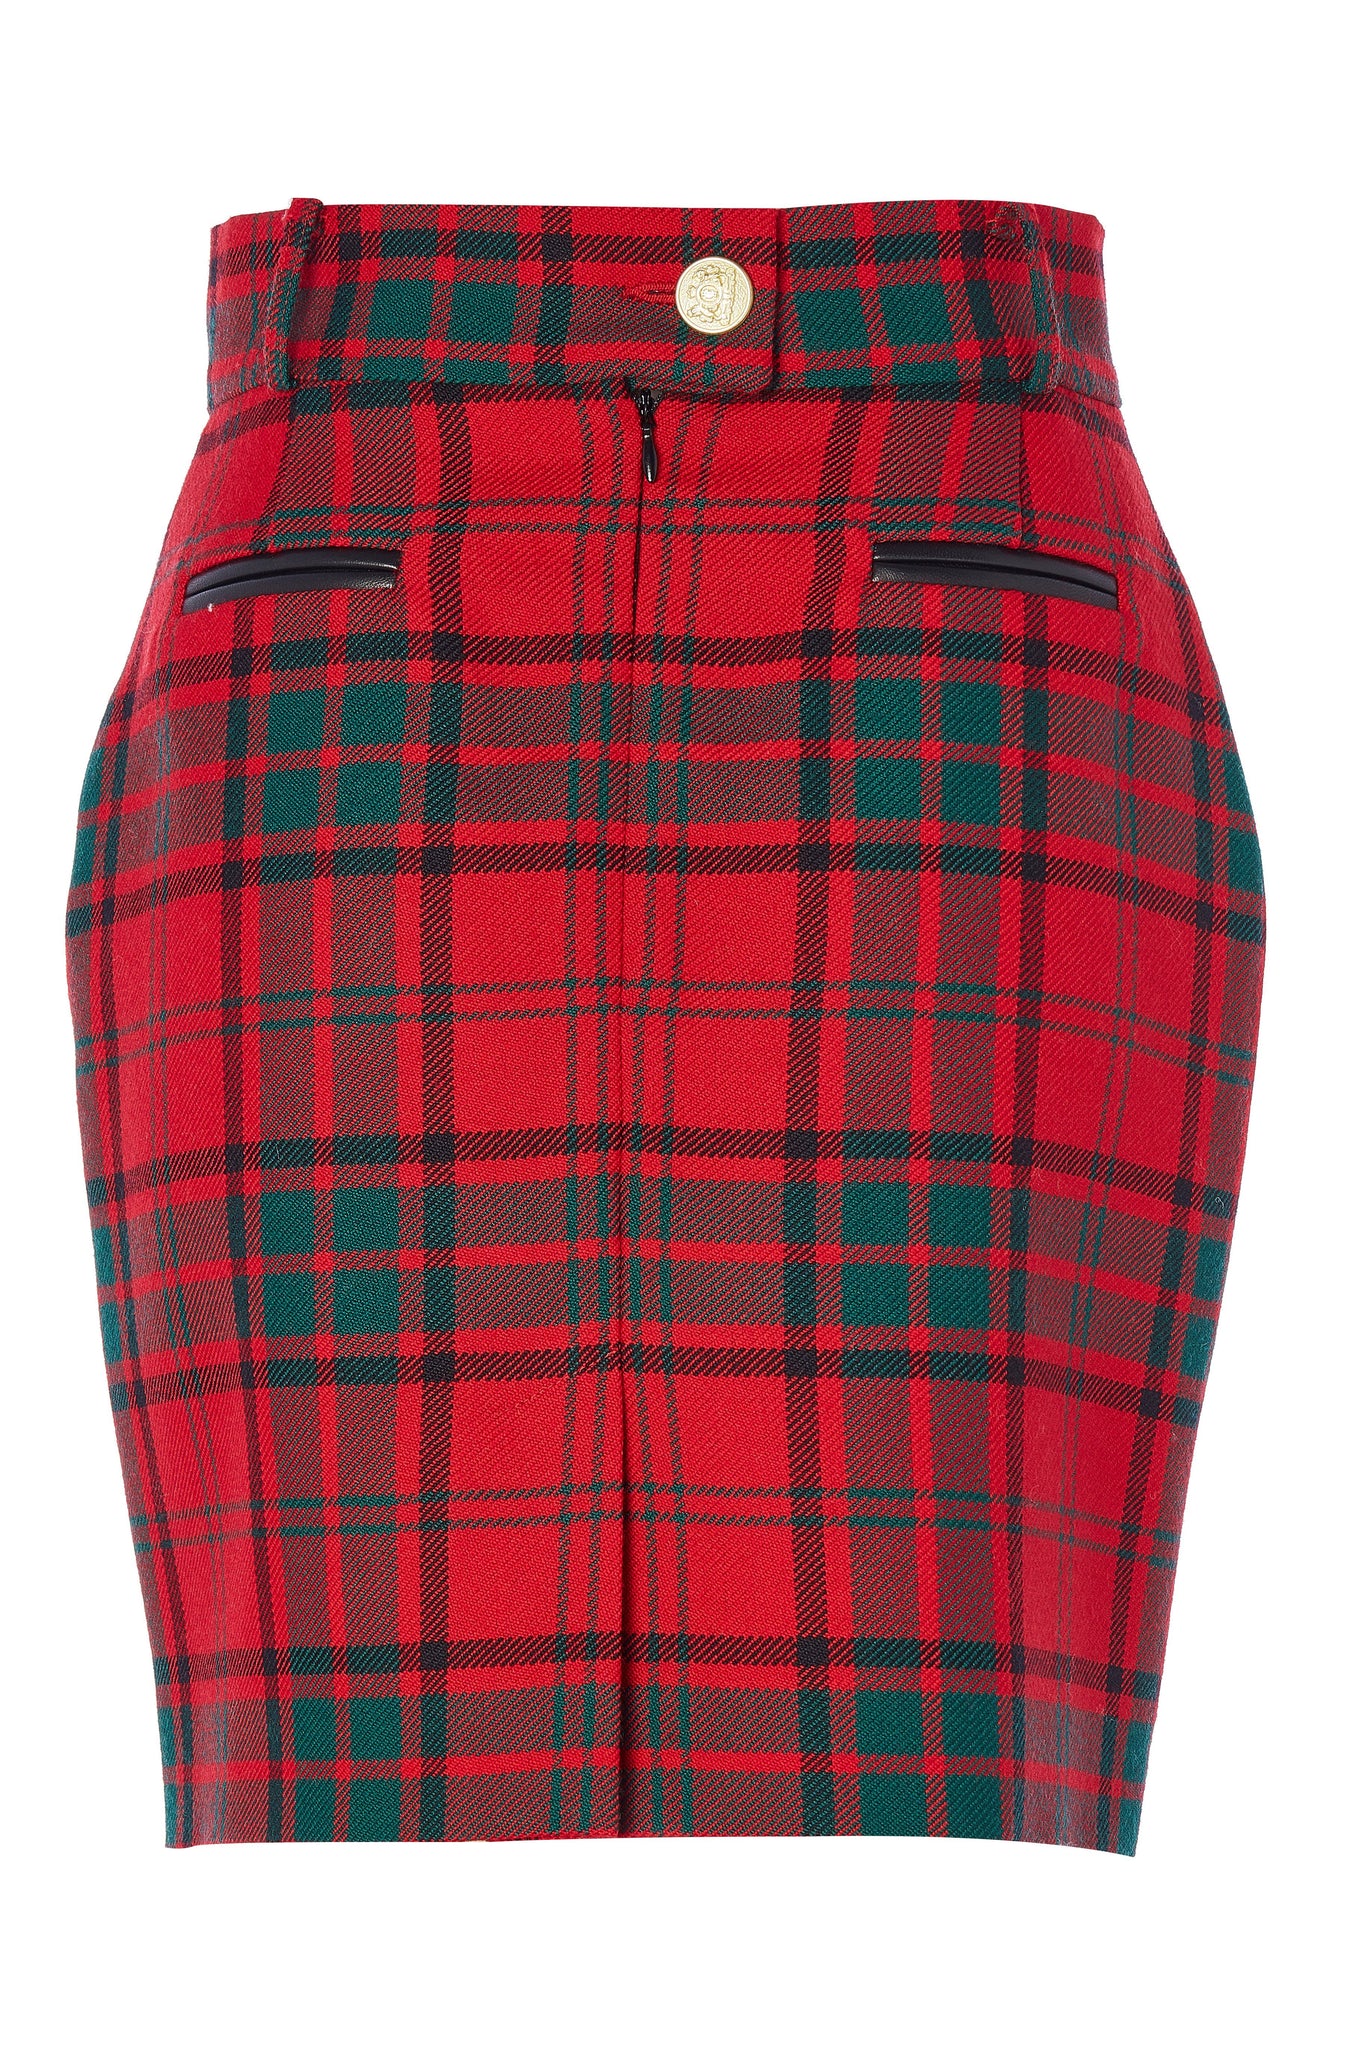 back of womens wool pencil mini skirt in red and green tartan check with concealed zip fastening on centre back and gold rivets down front